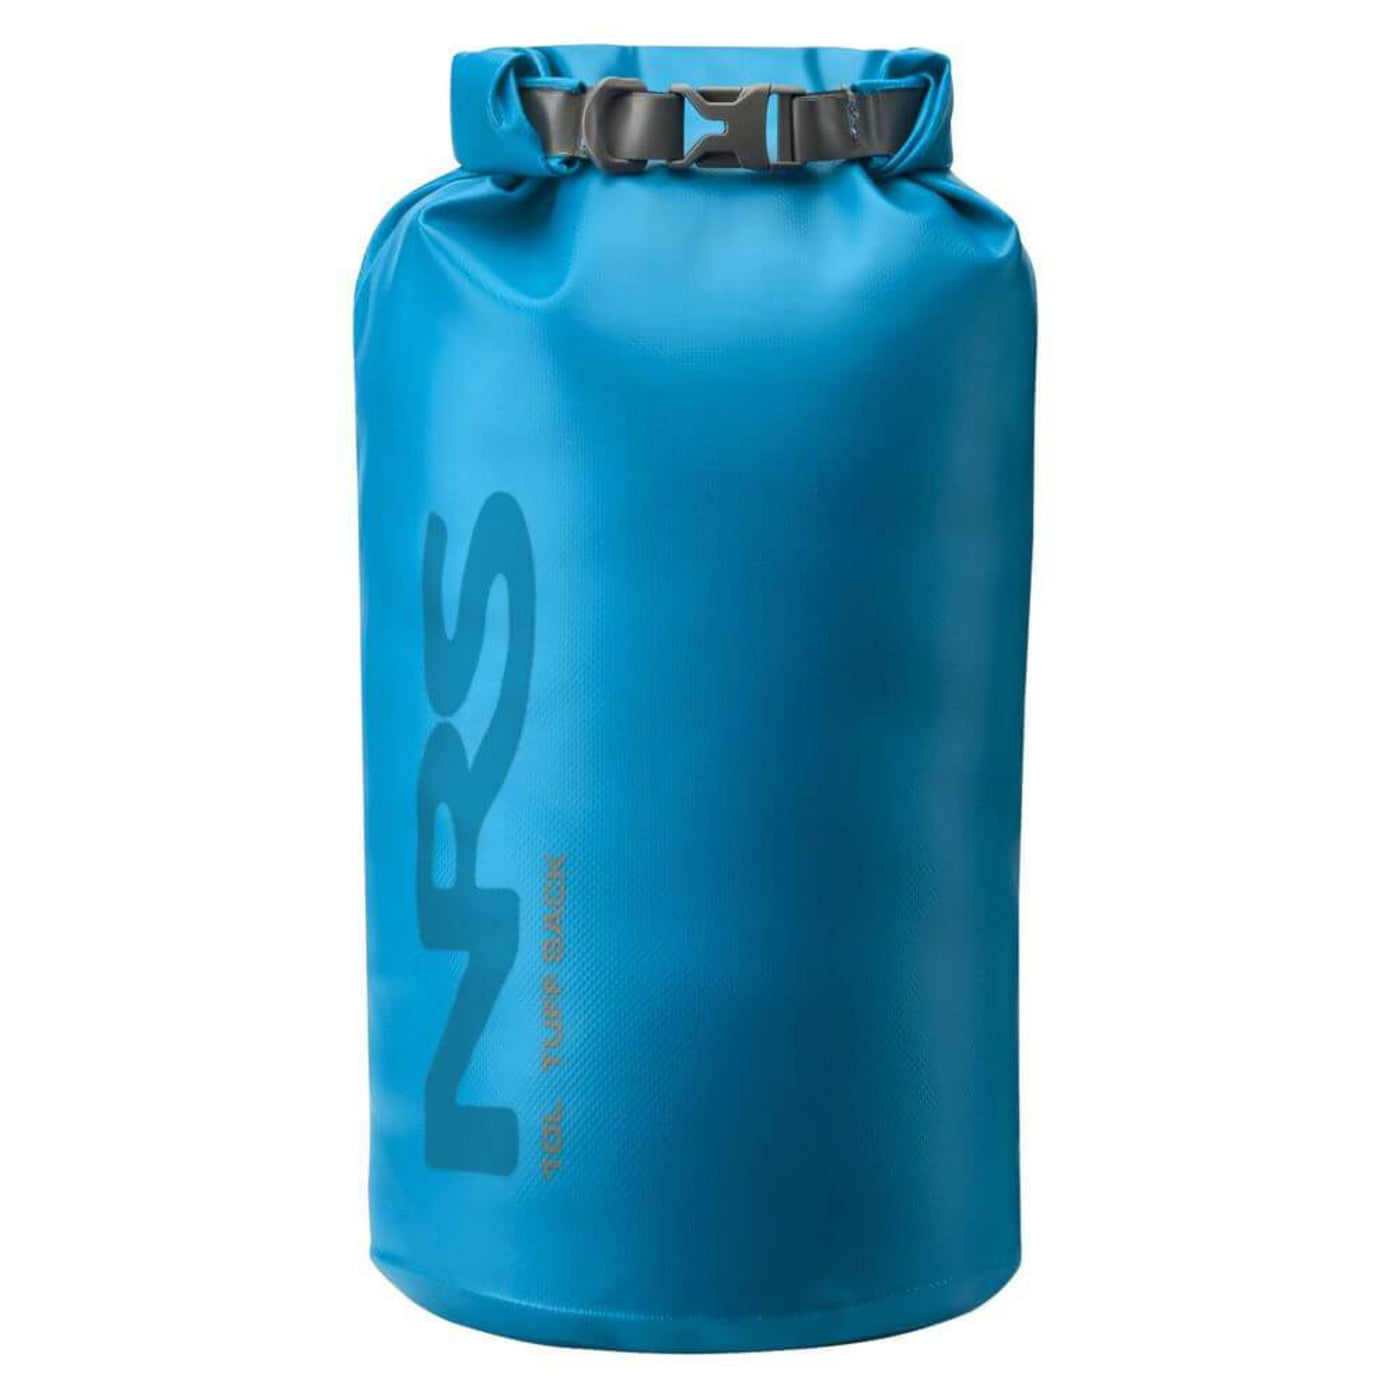 NRS Tuff Sack Dry Bag 45L | Kayak Dry Bags and Accessories | NRS NZ | Further Faster Christchurch NZ #blue